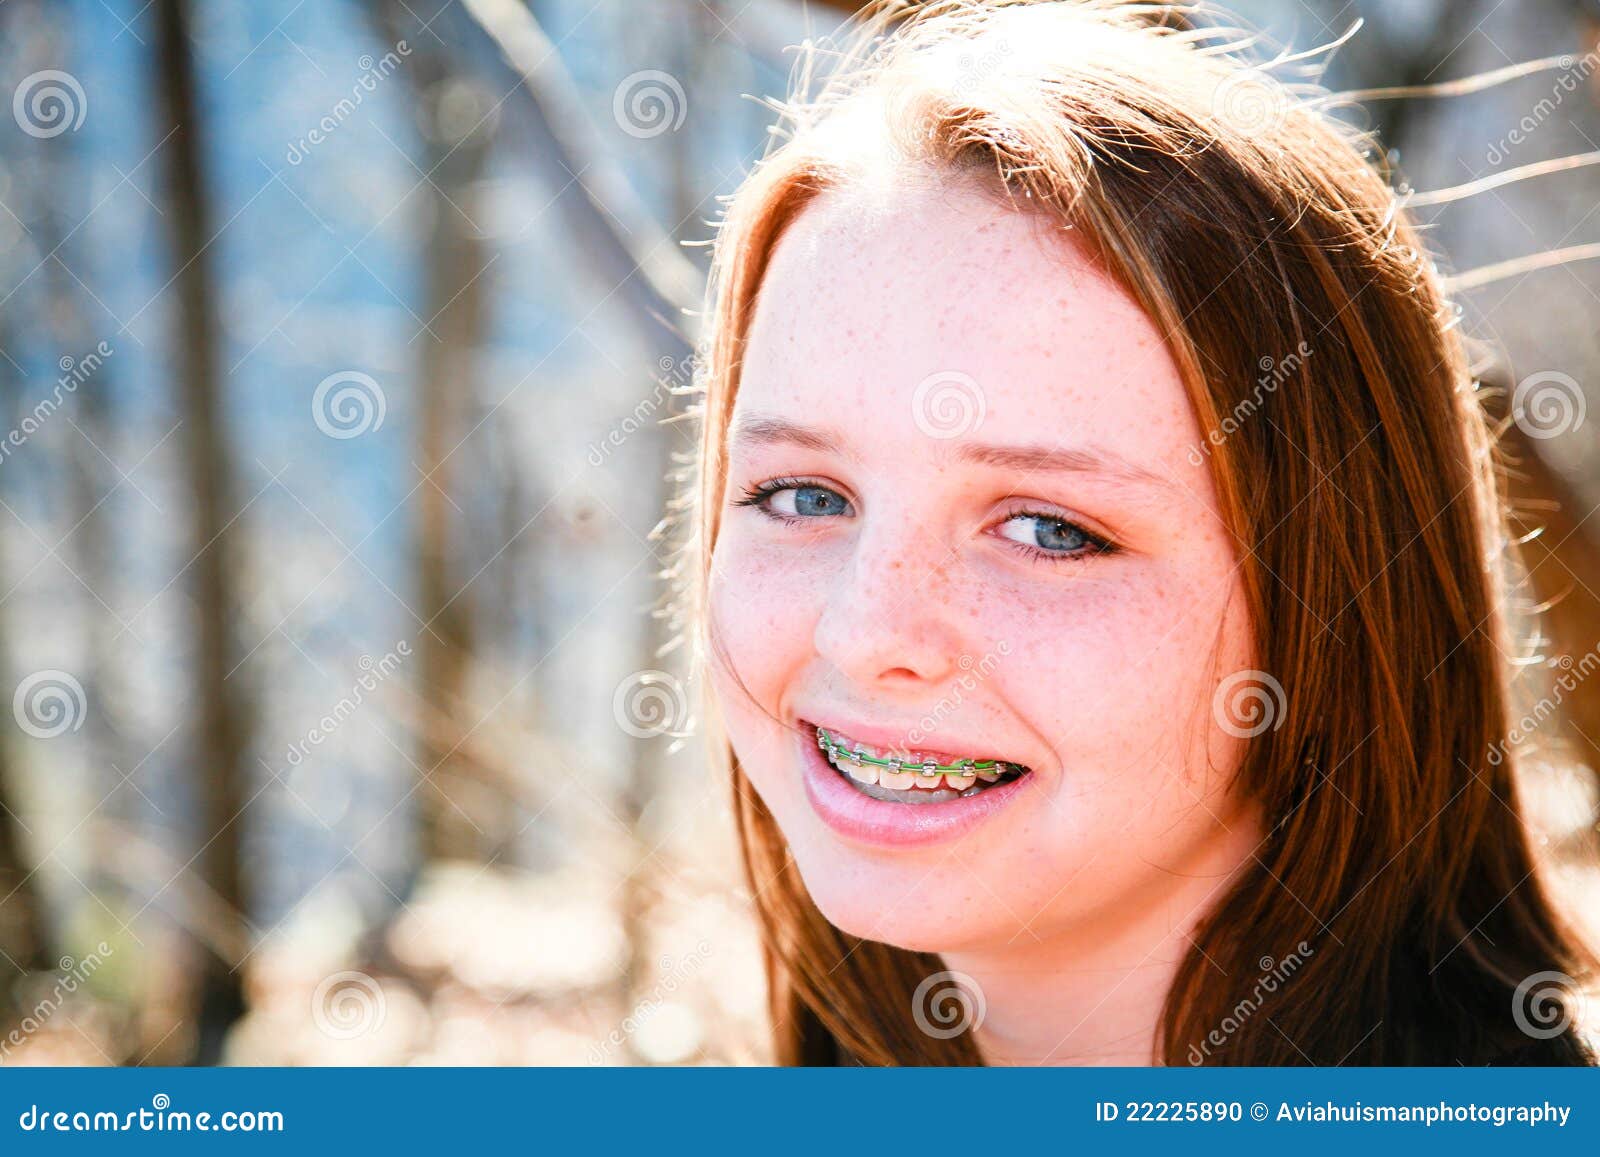 Happy Teen Girl on a Sunny Day Stock Photo - Image of freckled, hair ...